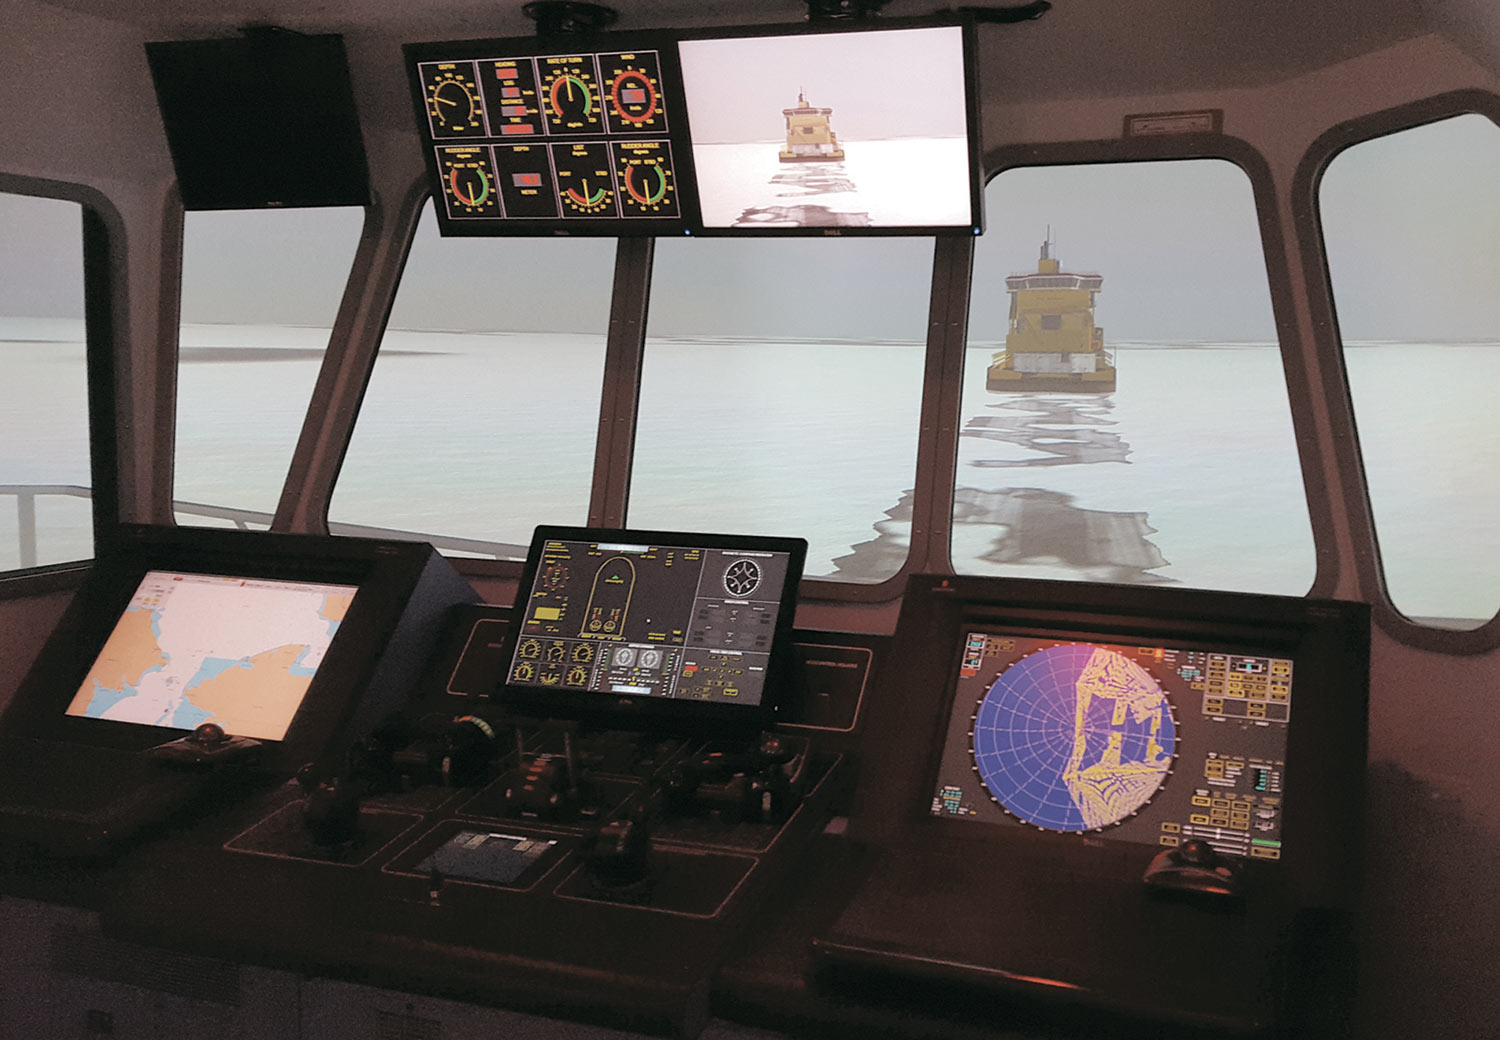 Polaris software created simulation of AVTEC ice navigation course